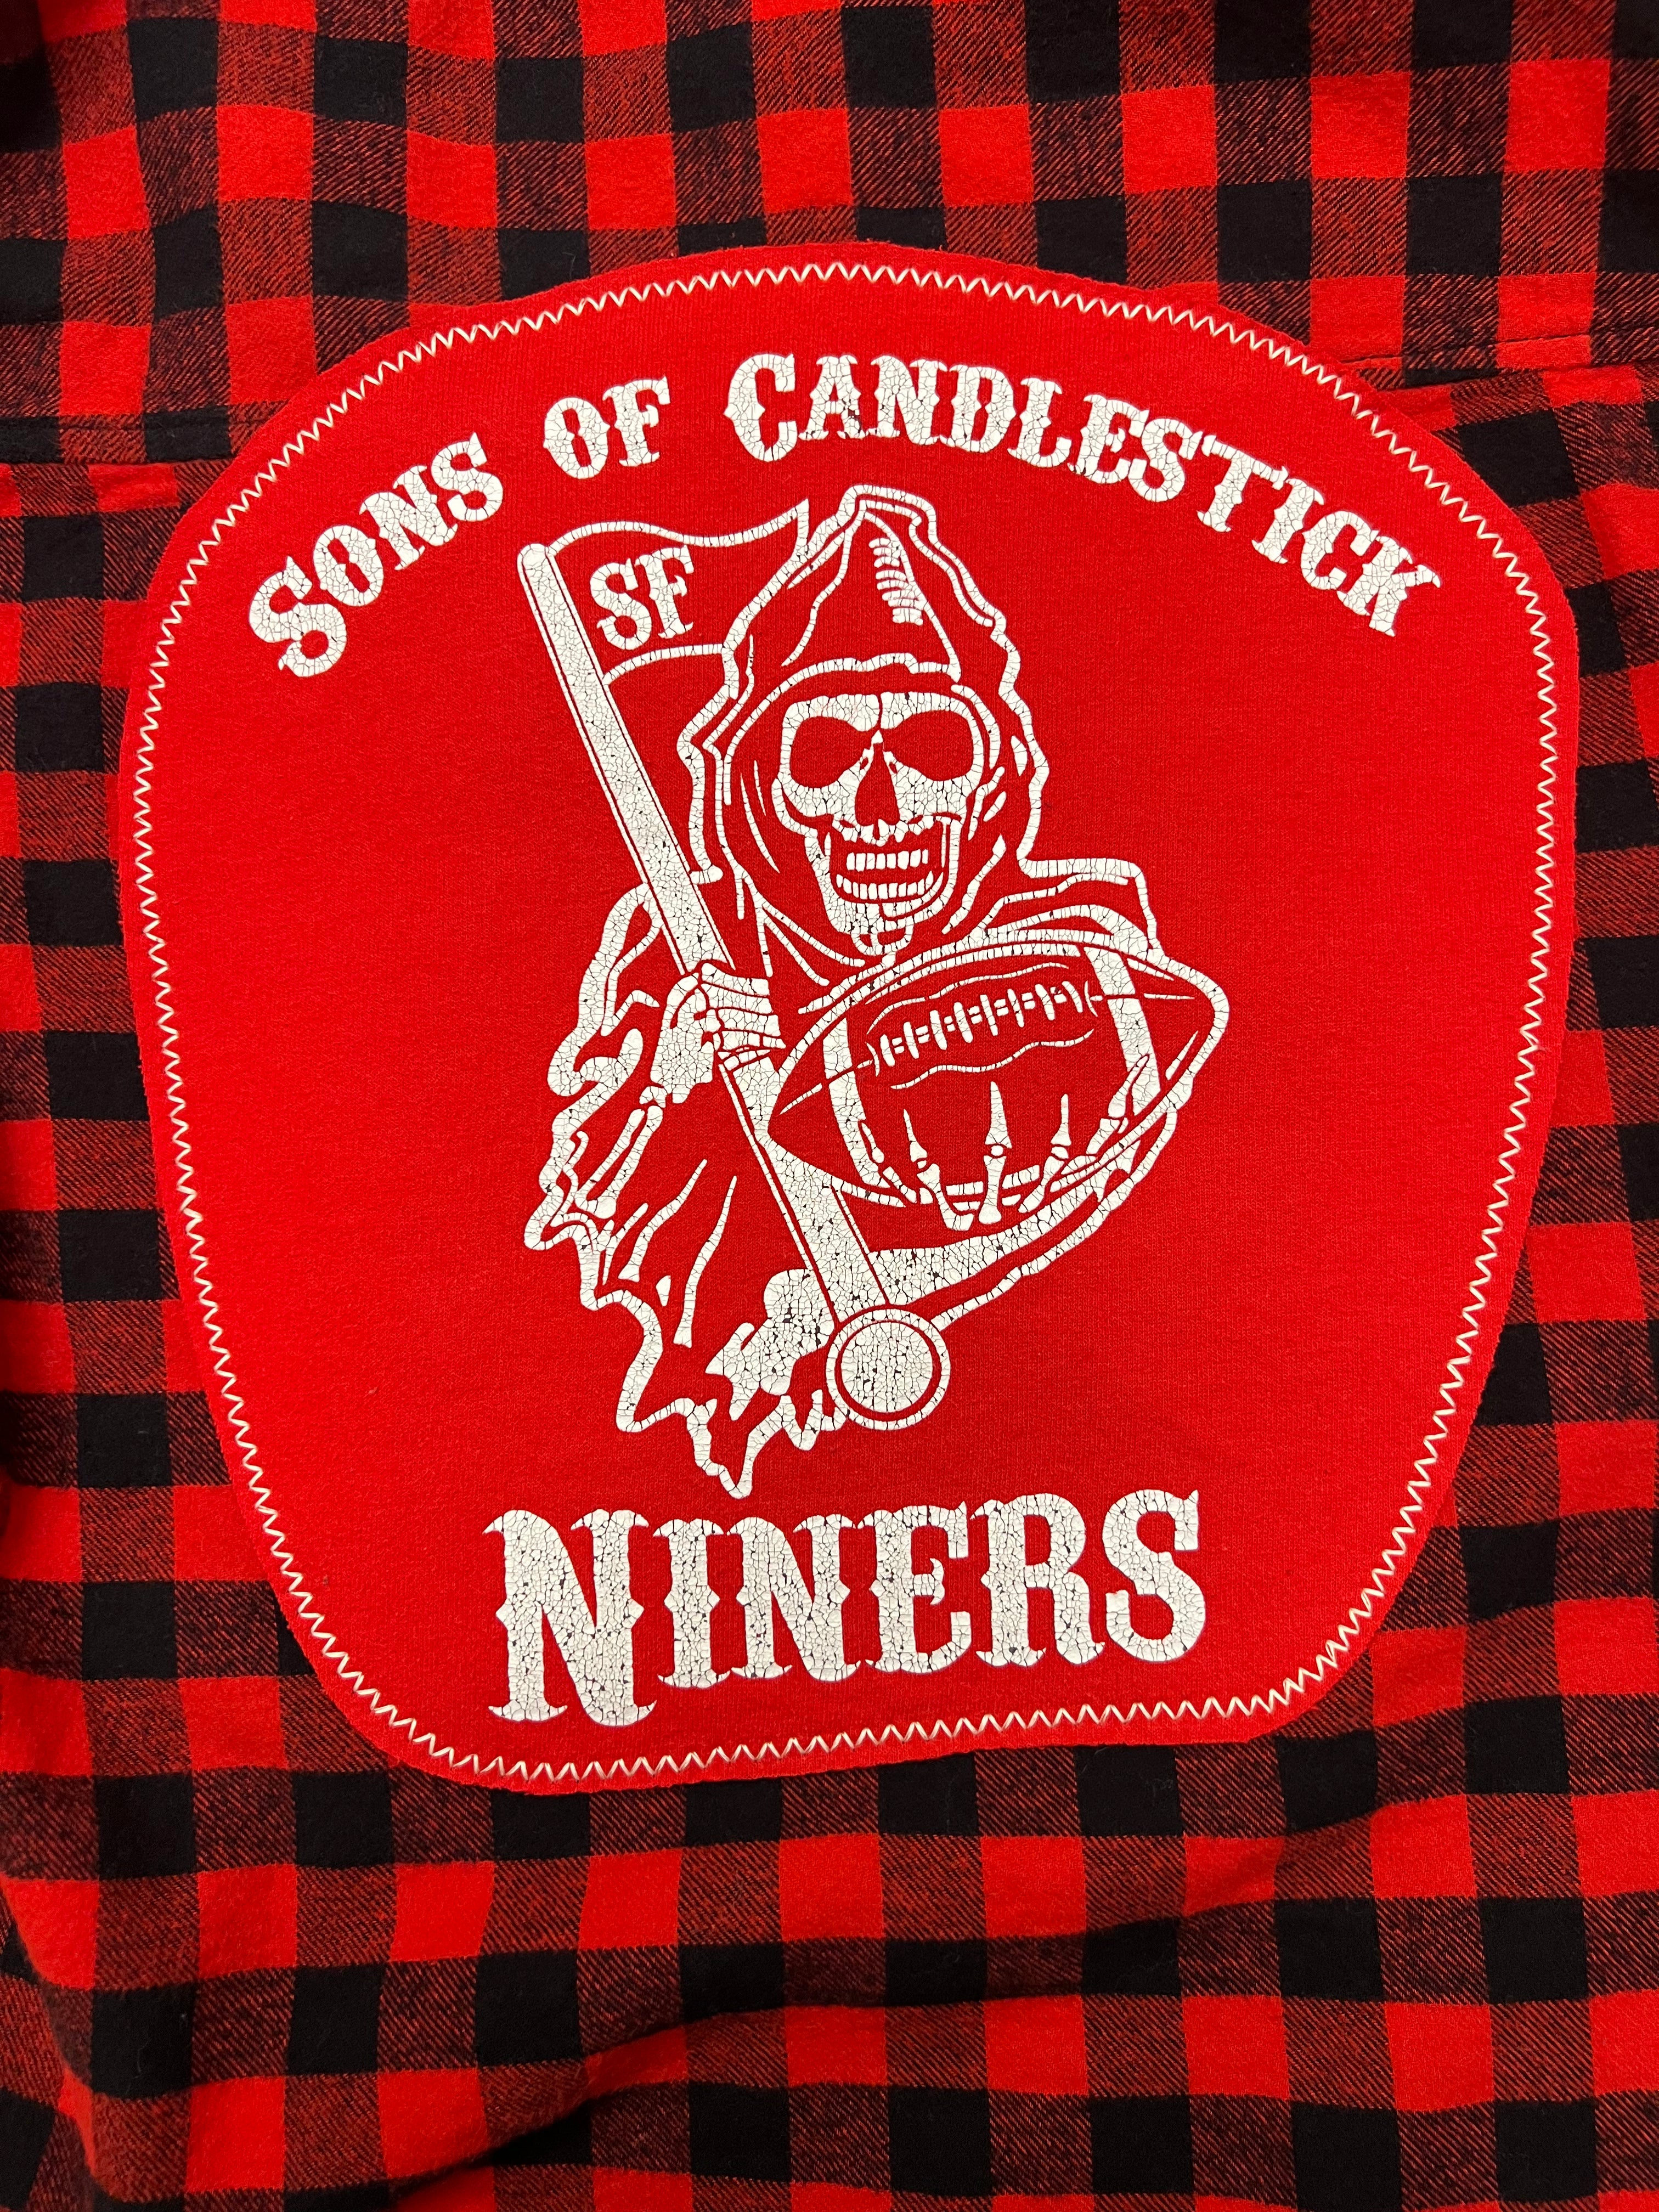 Sons of Candlestick - Niners (Women's - Size M)